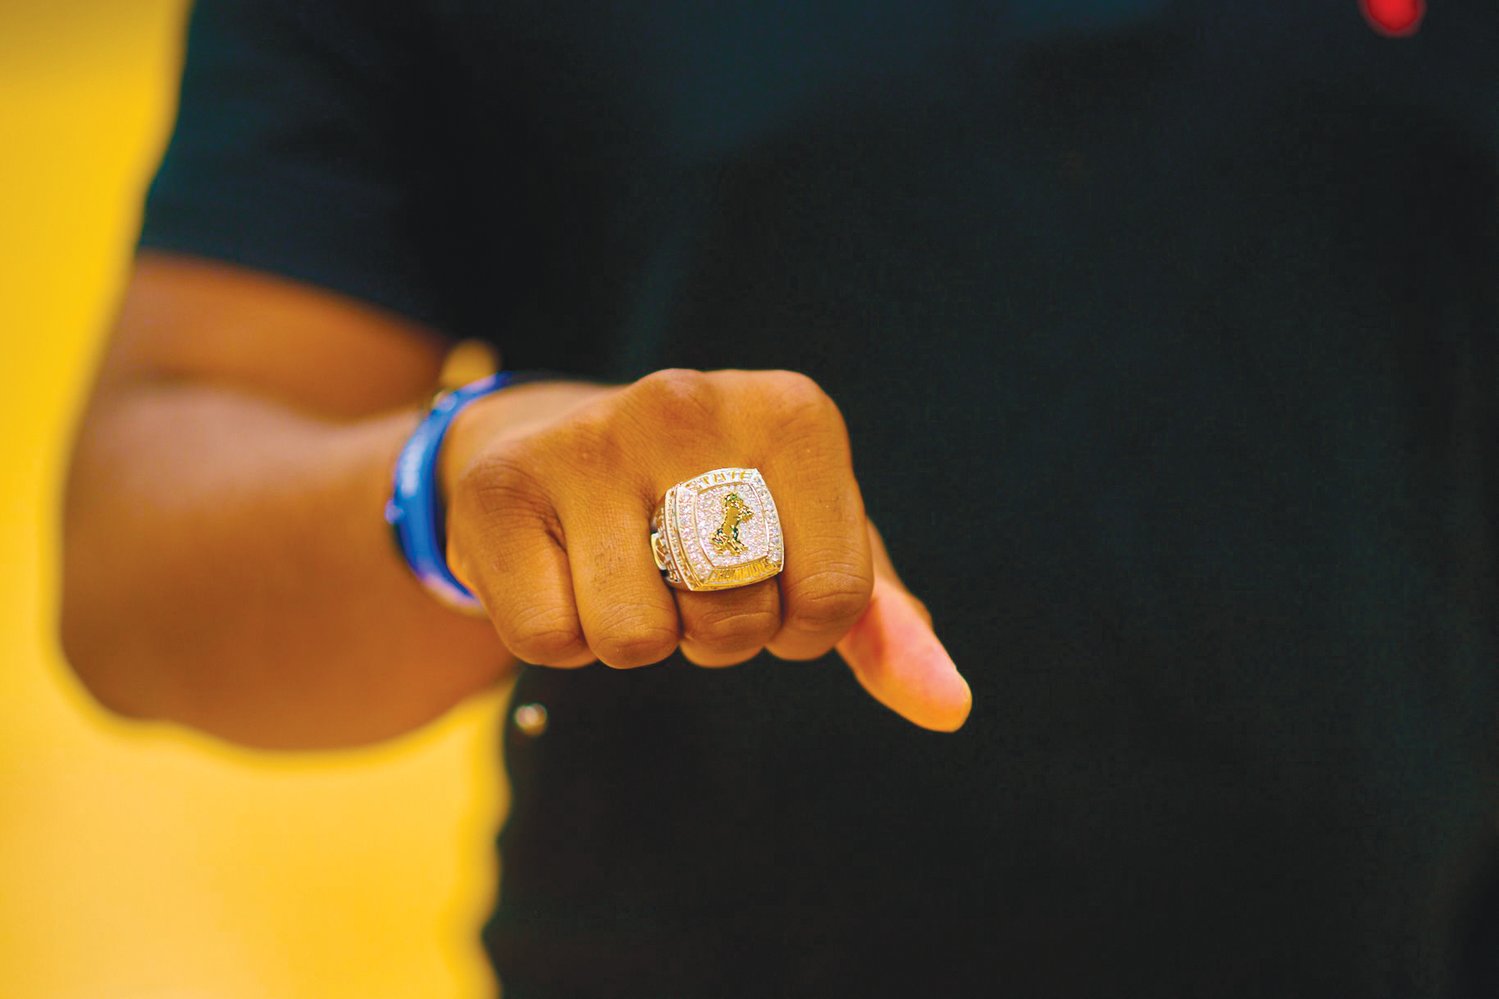 A closeup of the ring shows the Northwood Chargers logo rearing its head centered on a glimmering field of gems.